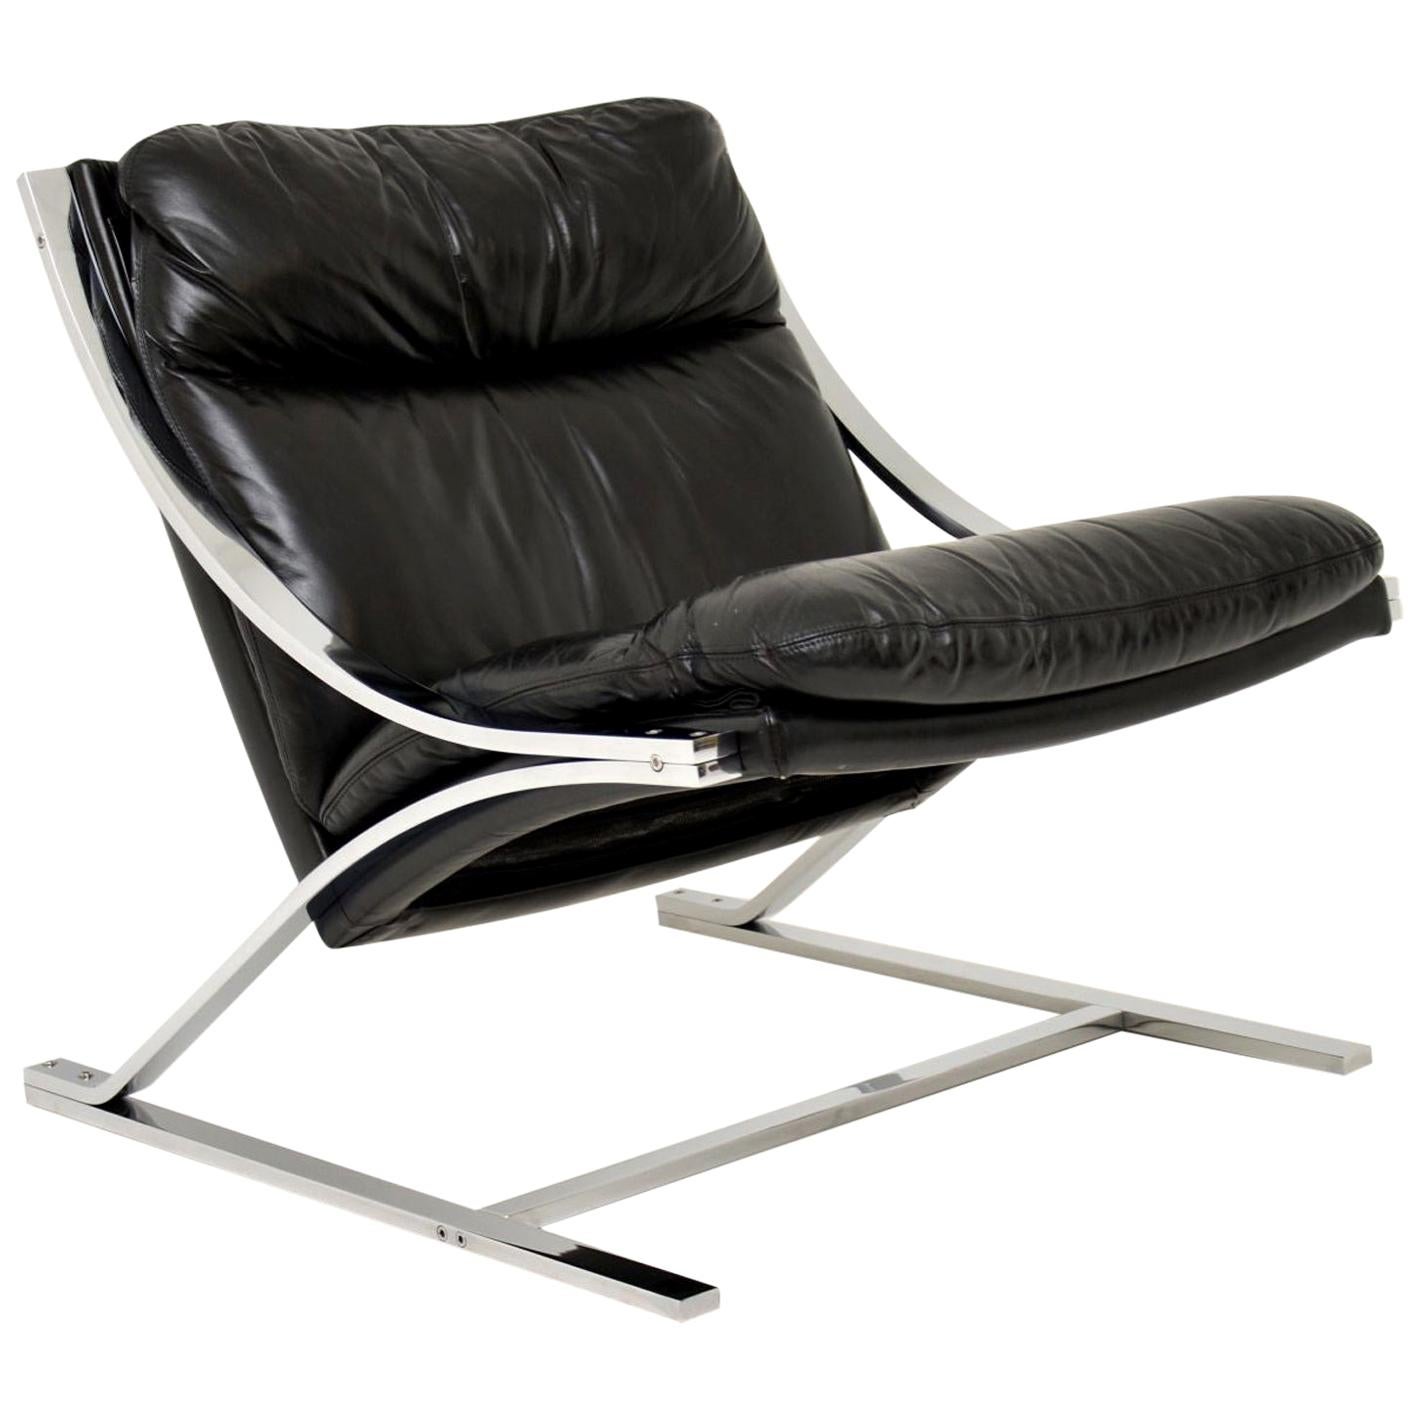 1960’s Vintage Leather & Chrome Zeta Chair by Paul Tuttle for Strassle